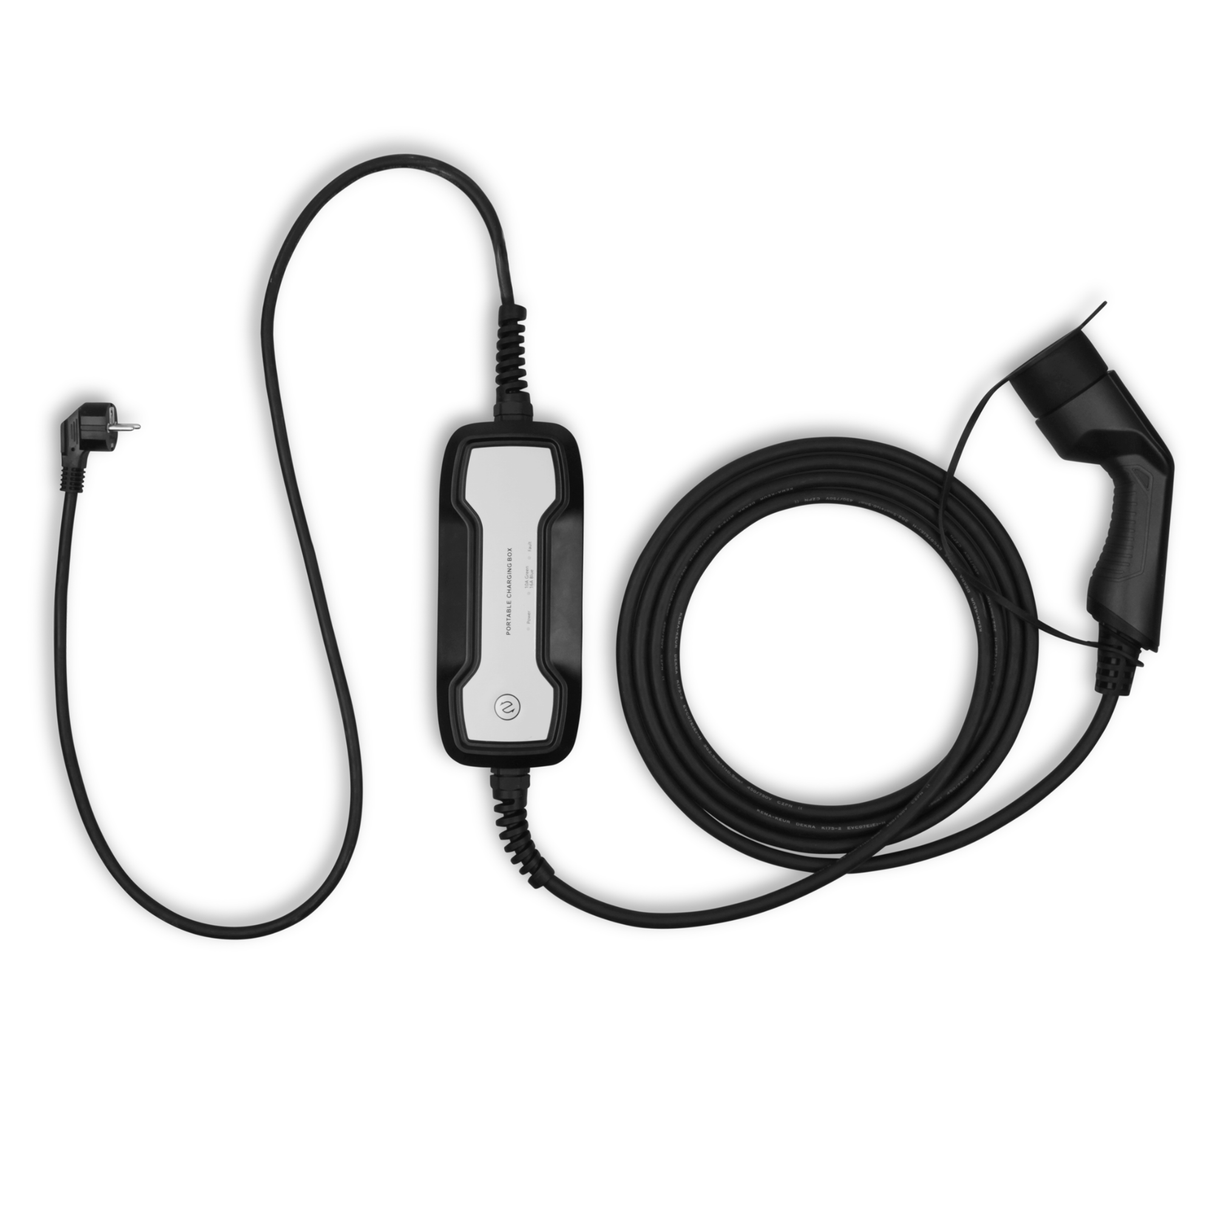 Mobile charger DS 7 - Besen - Type 2 to Schuko